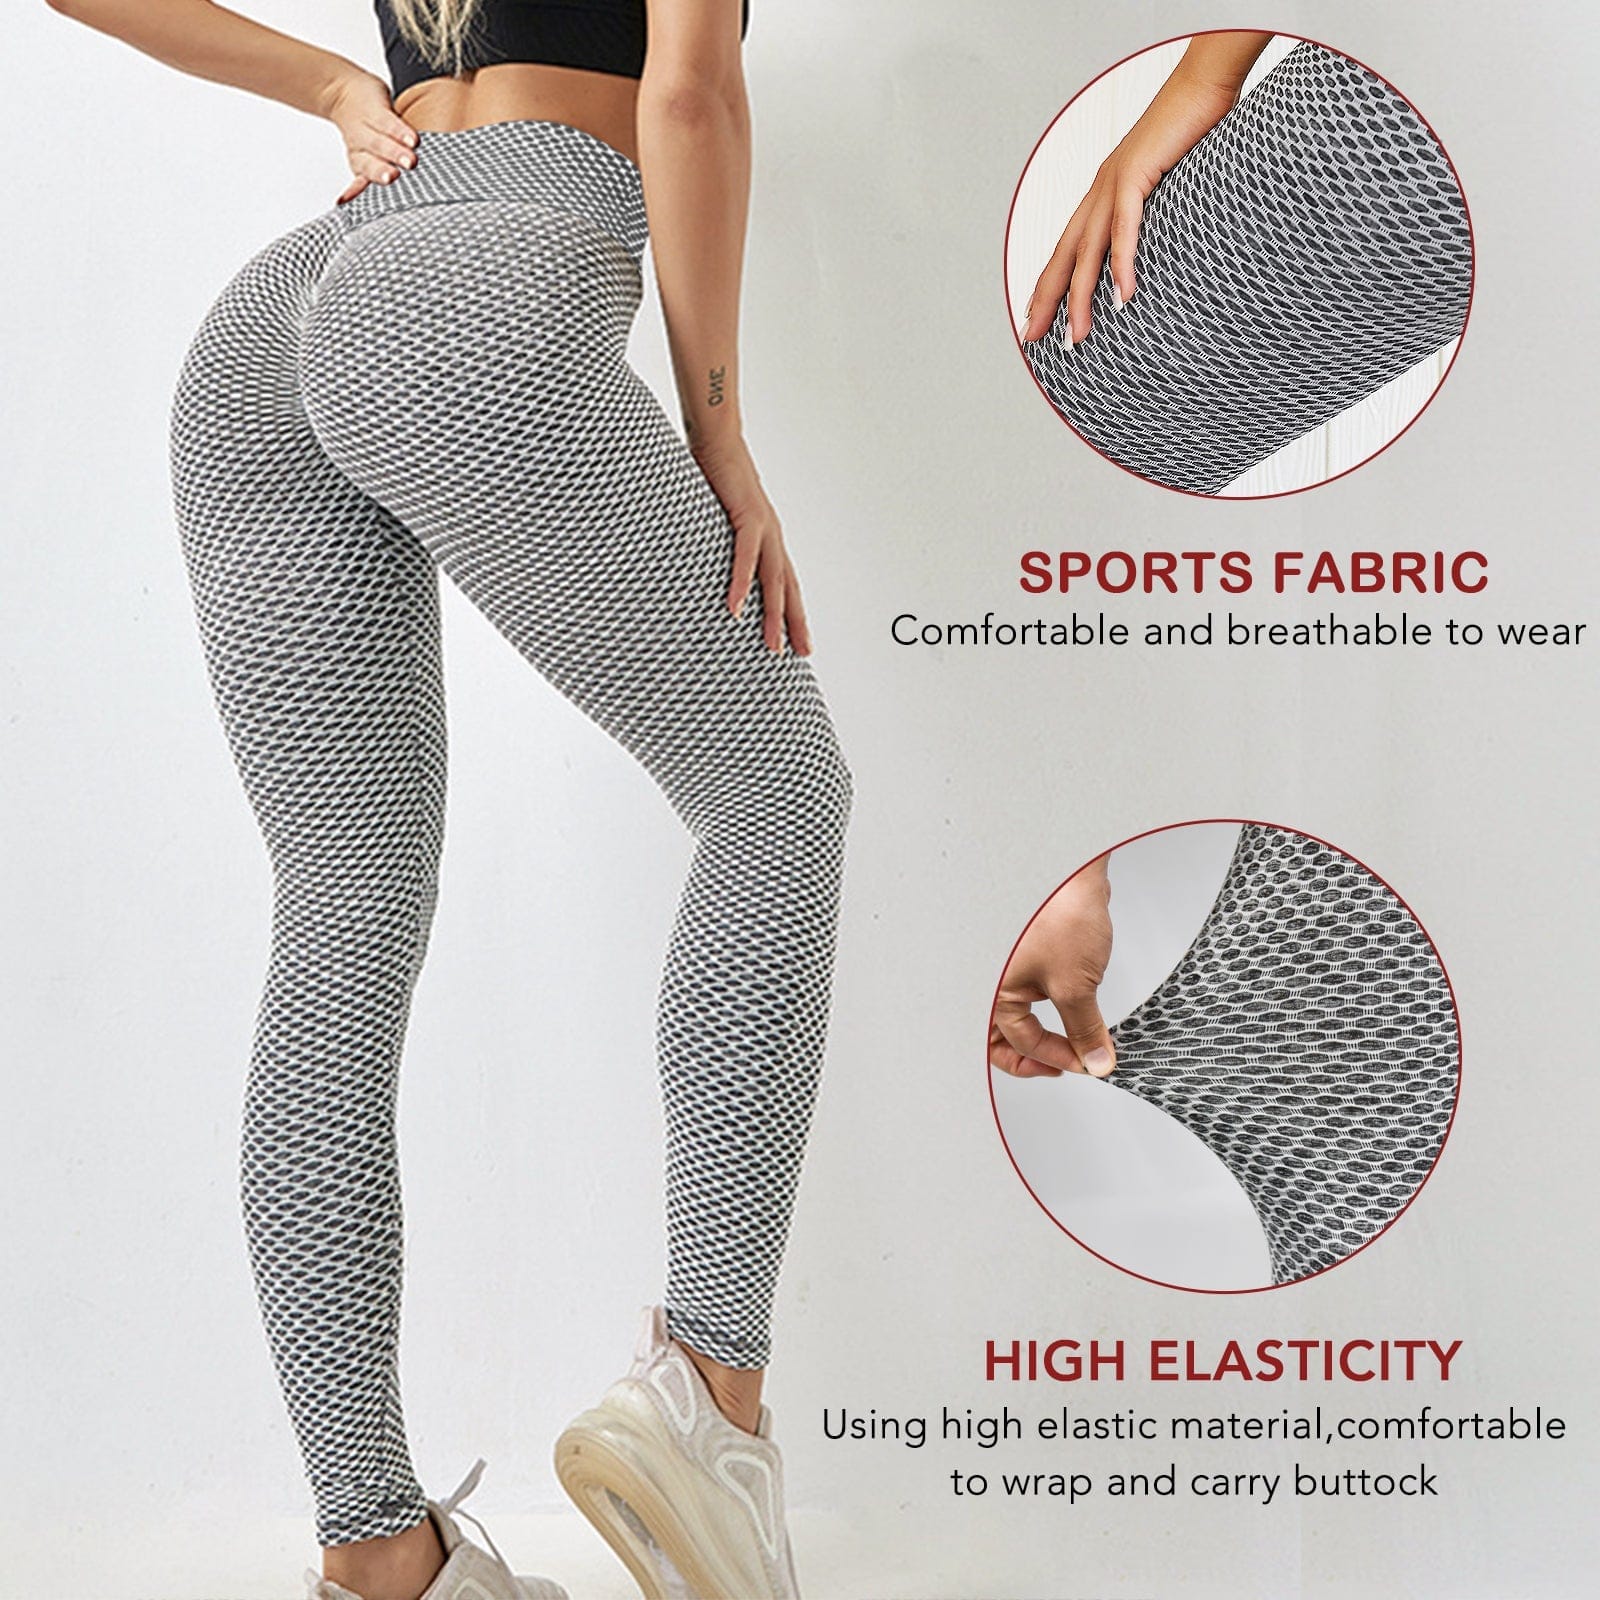  TIK Tok Leggings Women Butt Lifting Workout Tights Plus Size  Sports High Waist Yoga Pants Quick Dry Water-Resistant Comfortable Woman  (M, Blue) : Handmade Products